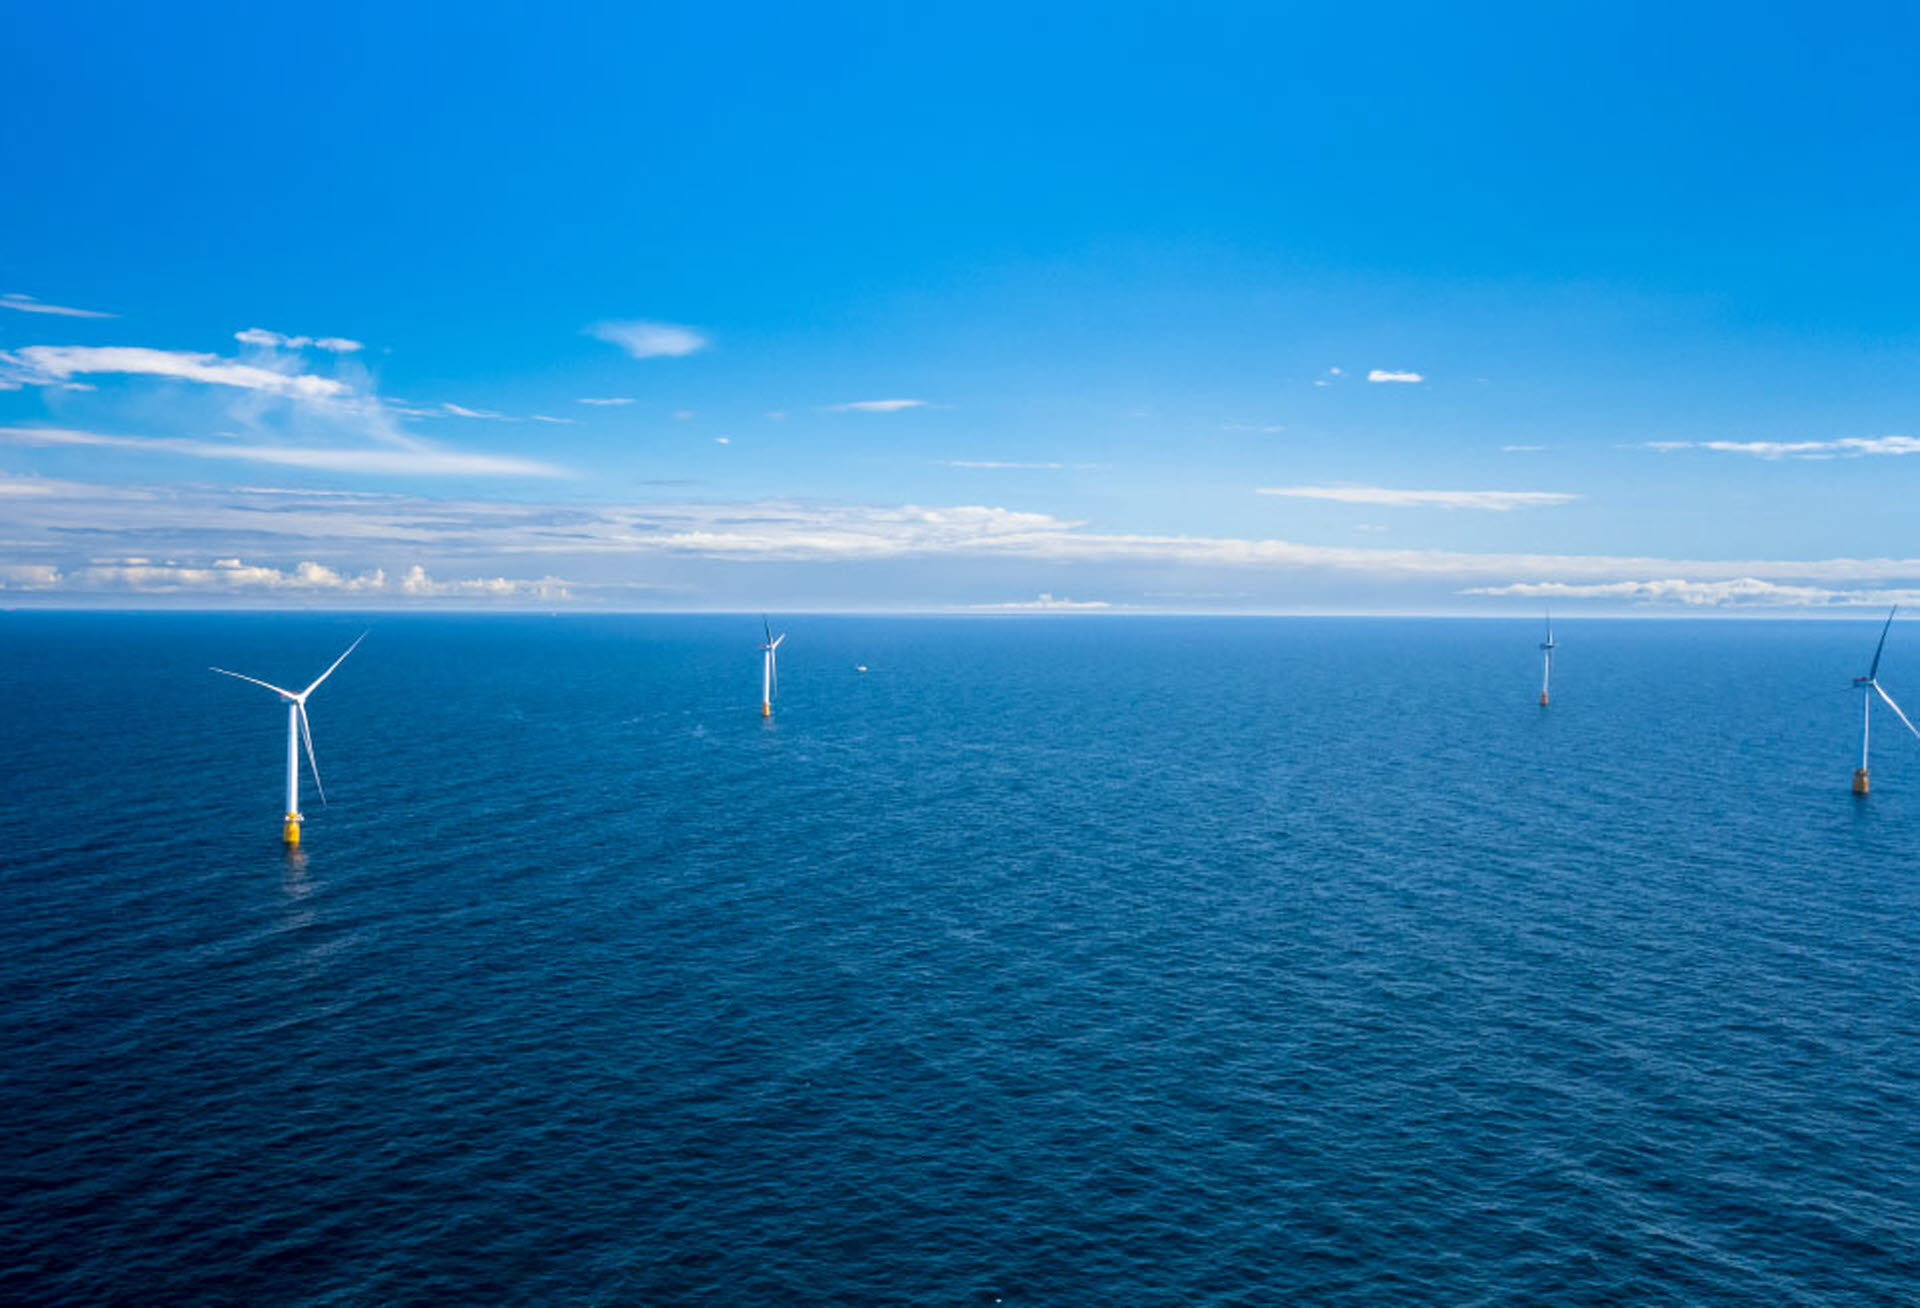 Equinor Hywind Scotland offshore wind farm. Equinor is one of the NorthWind partners.